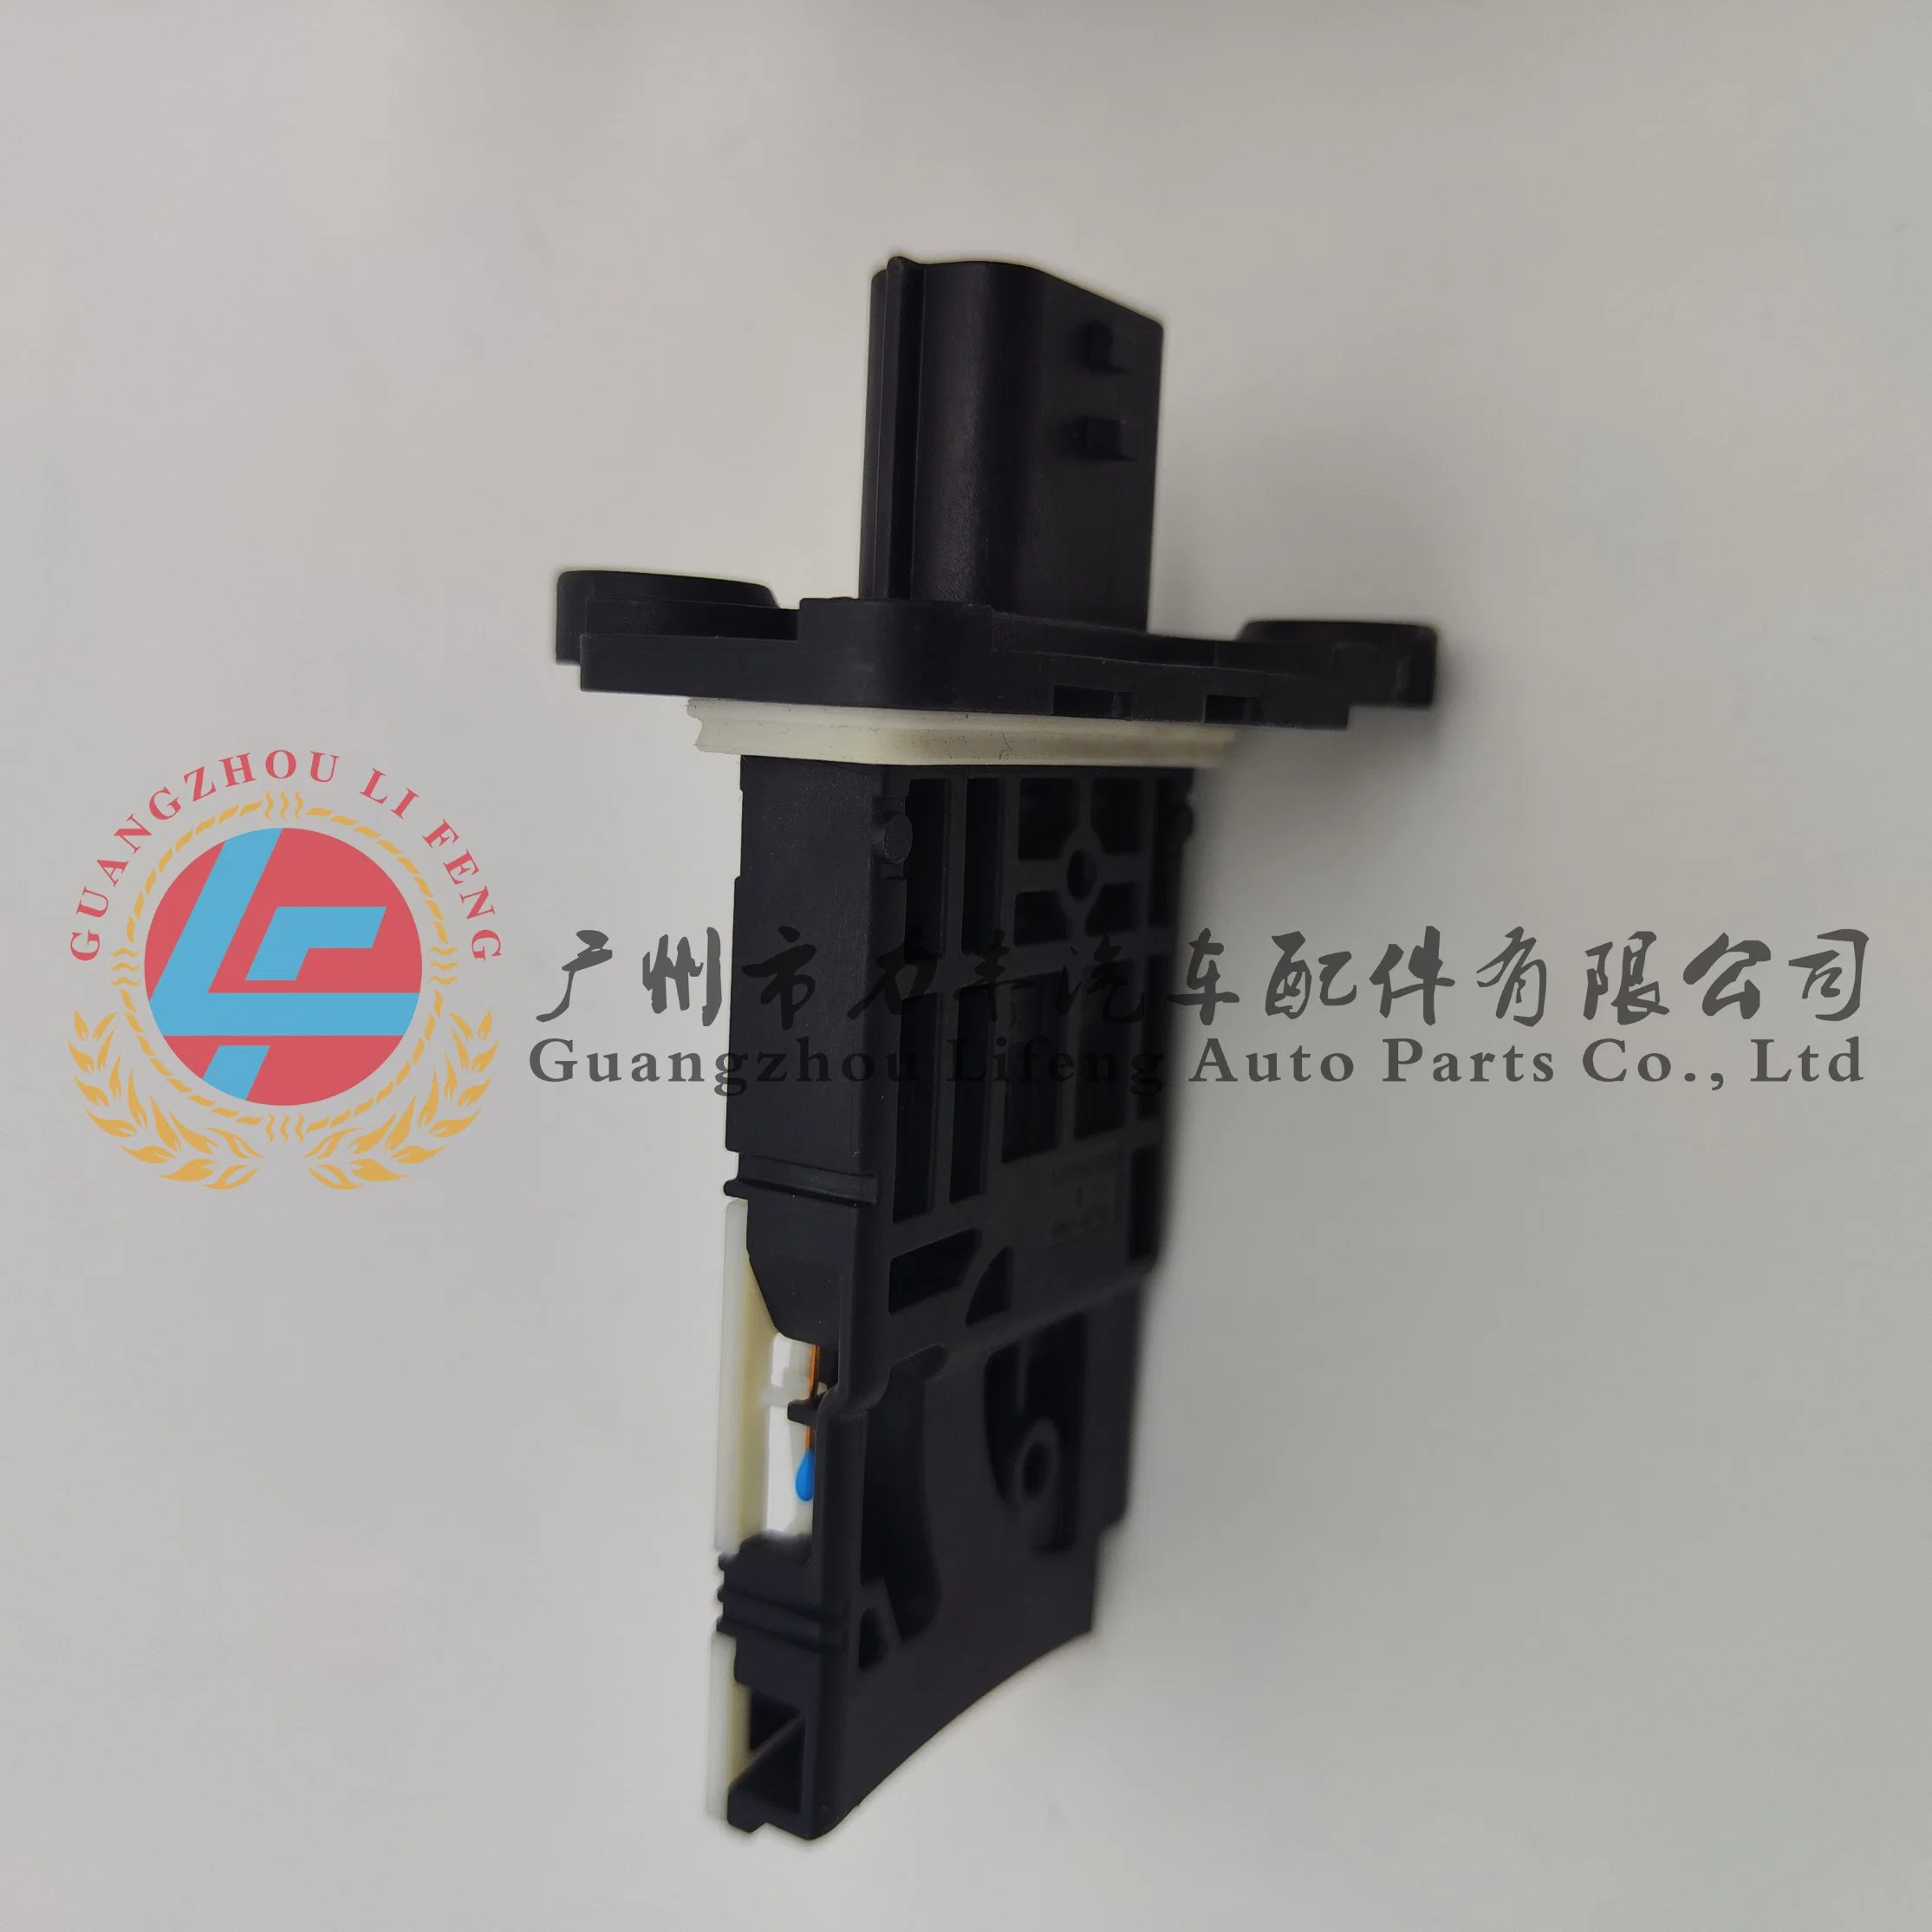 High-Quality Air Flow Sensor Sensor Is Suitable for Opel Renault and Other Models 5wk98504 Air Flow Meter